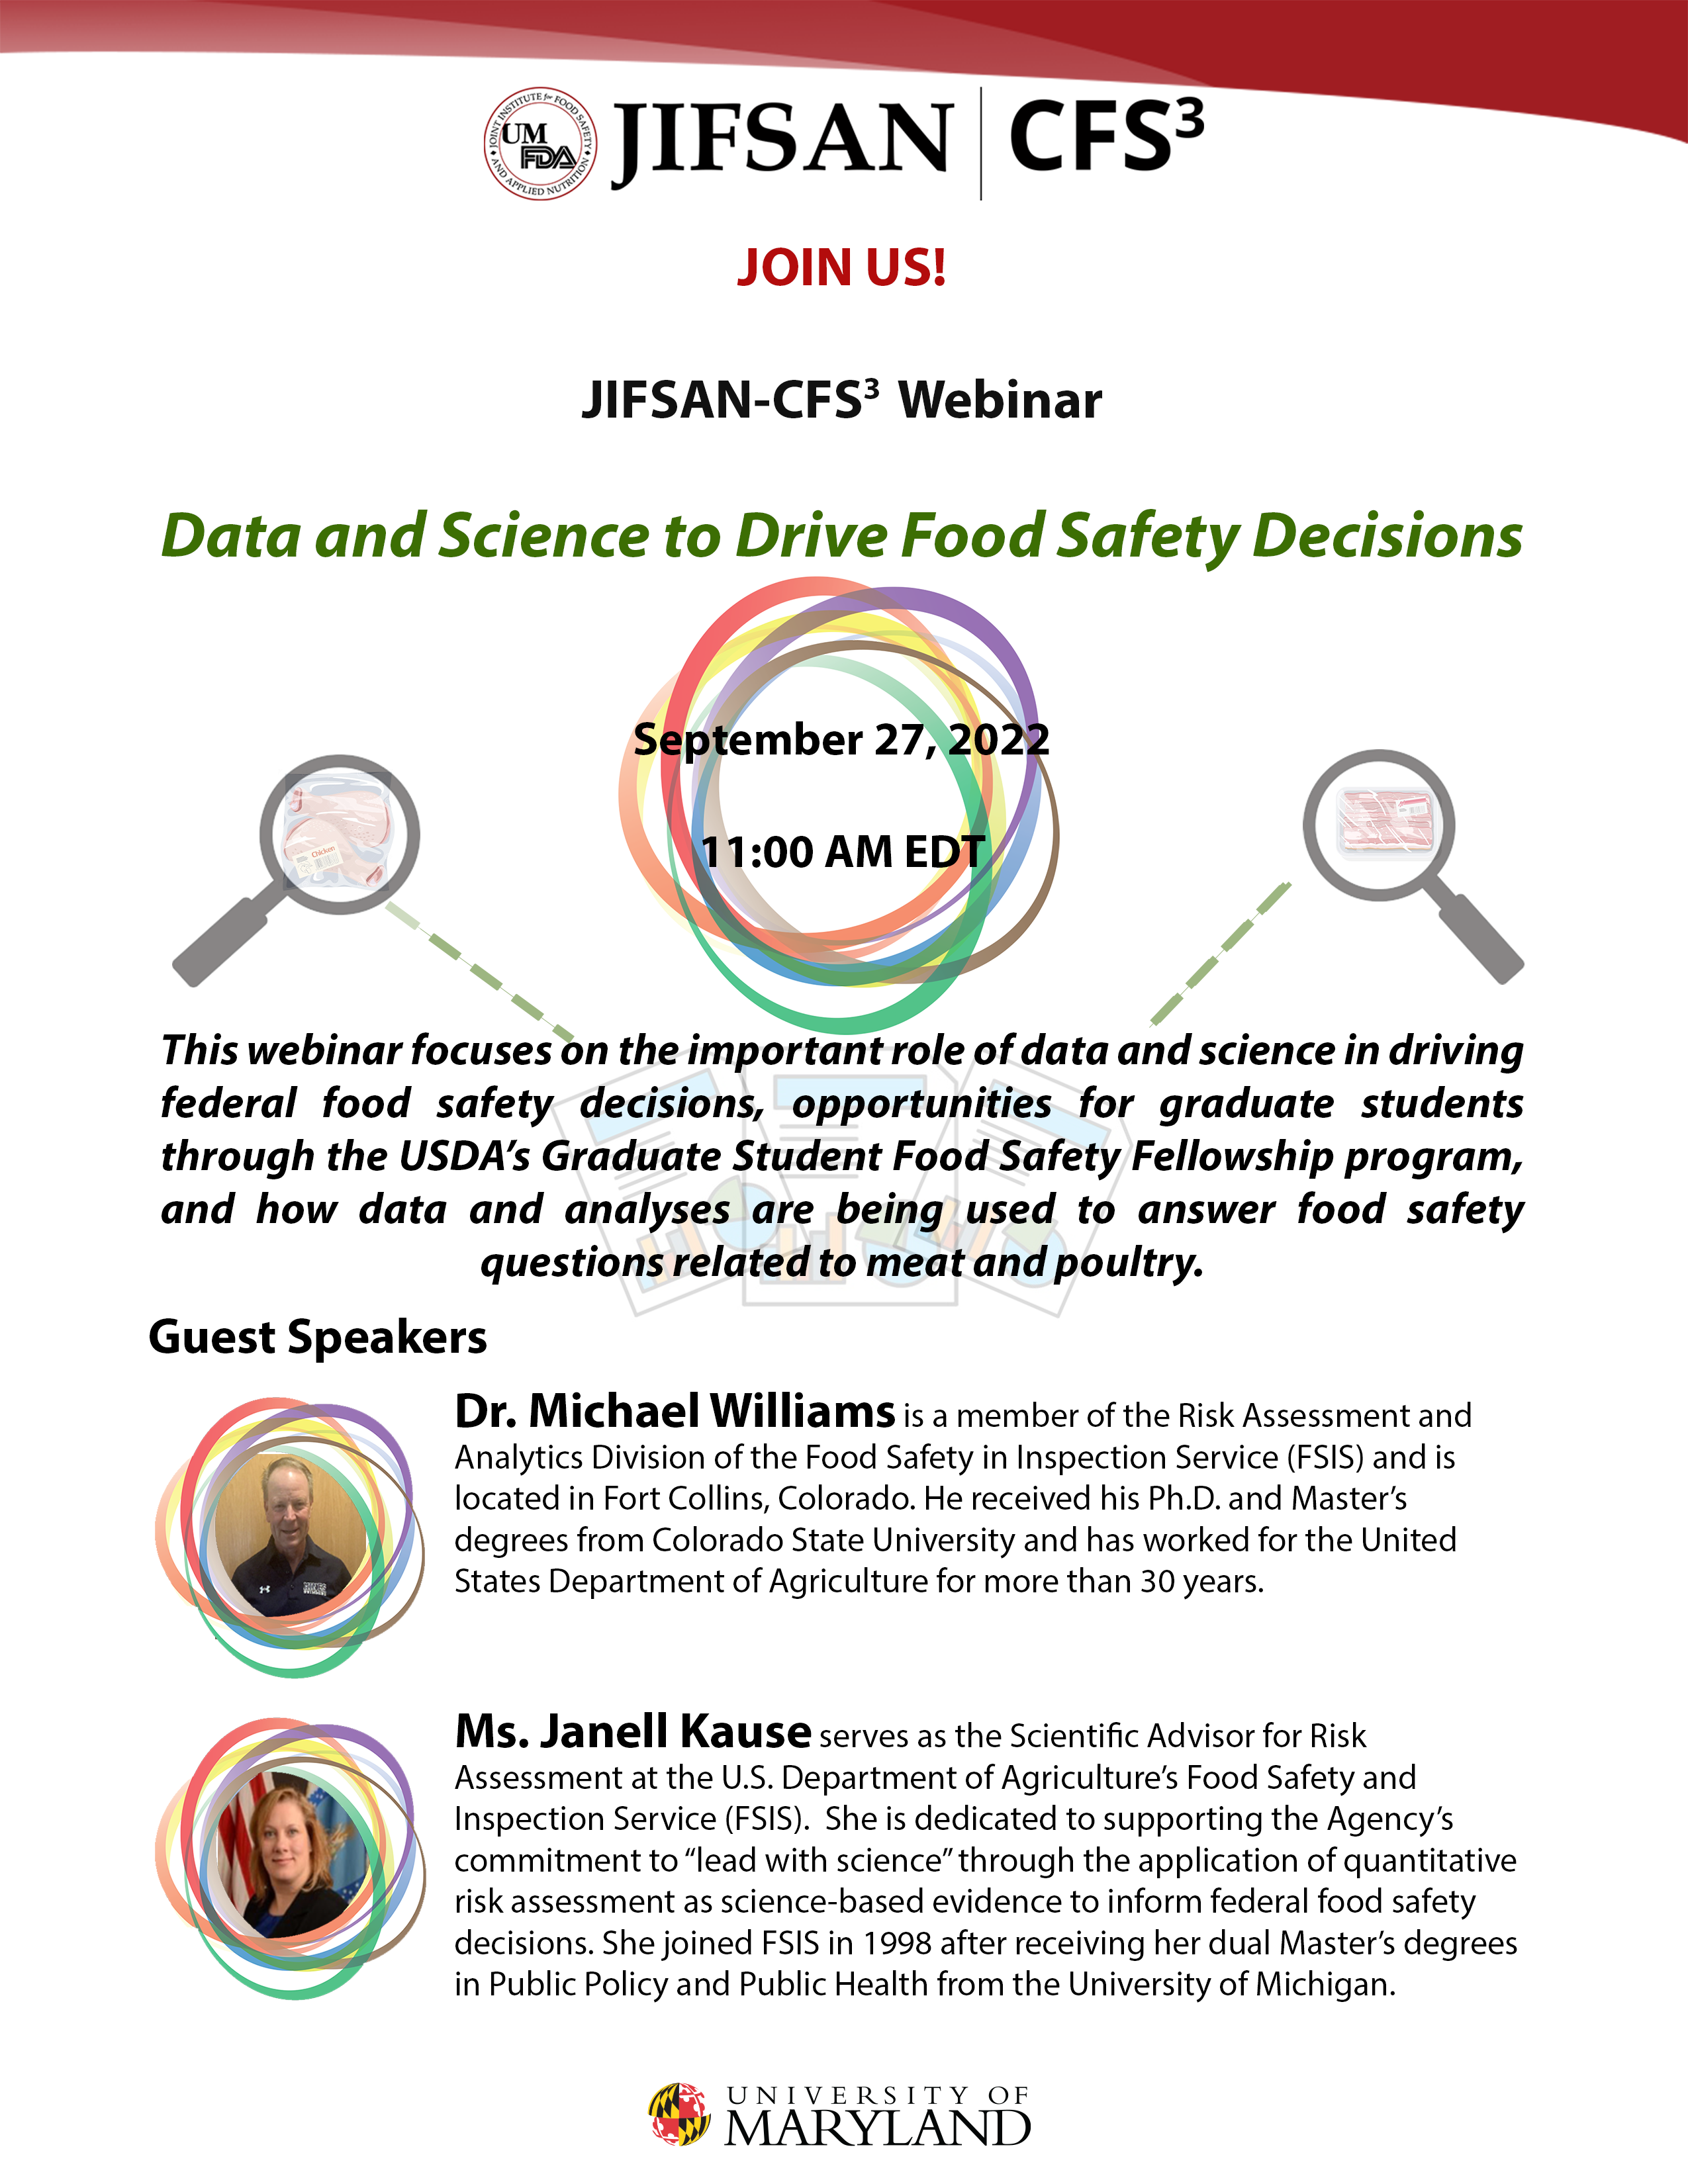 JIFSAN-CFS3, University of Maryland, Webinar. Data amd Science to Drive Food Safety Decisions. September 27, 2022. 11:00 a.m. EDT